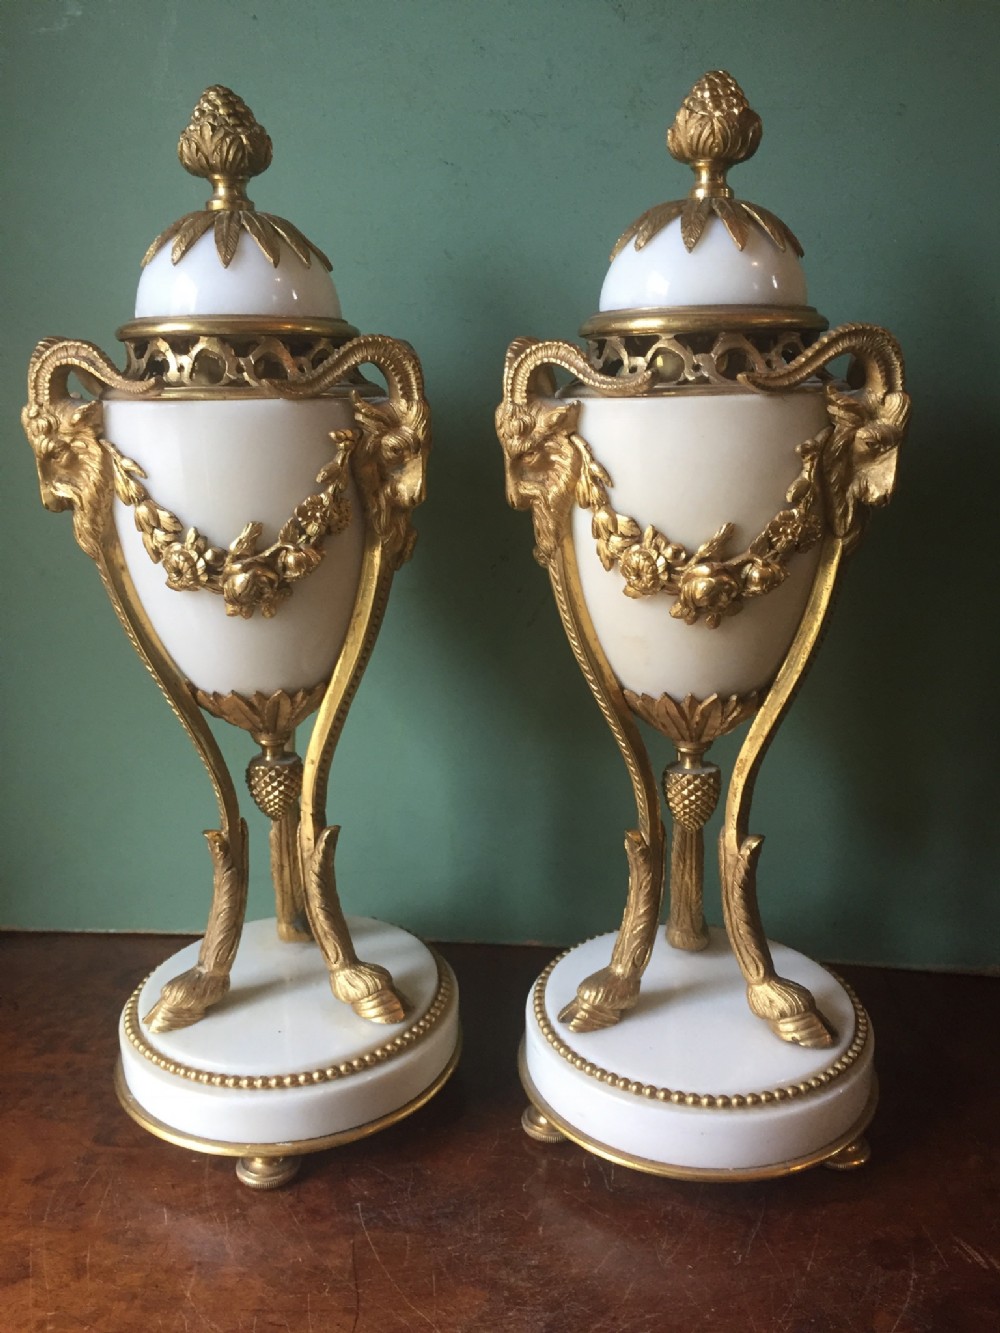 pair of late c19th early c20th french white marble and ormolu bronze mounted vases in the neoclassical style